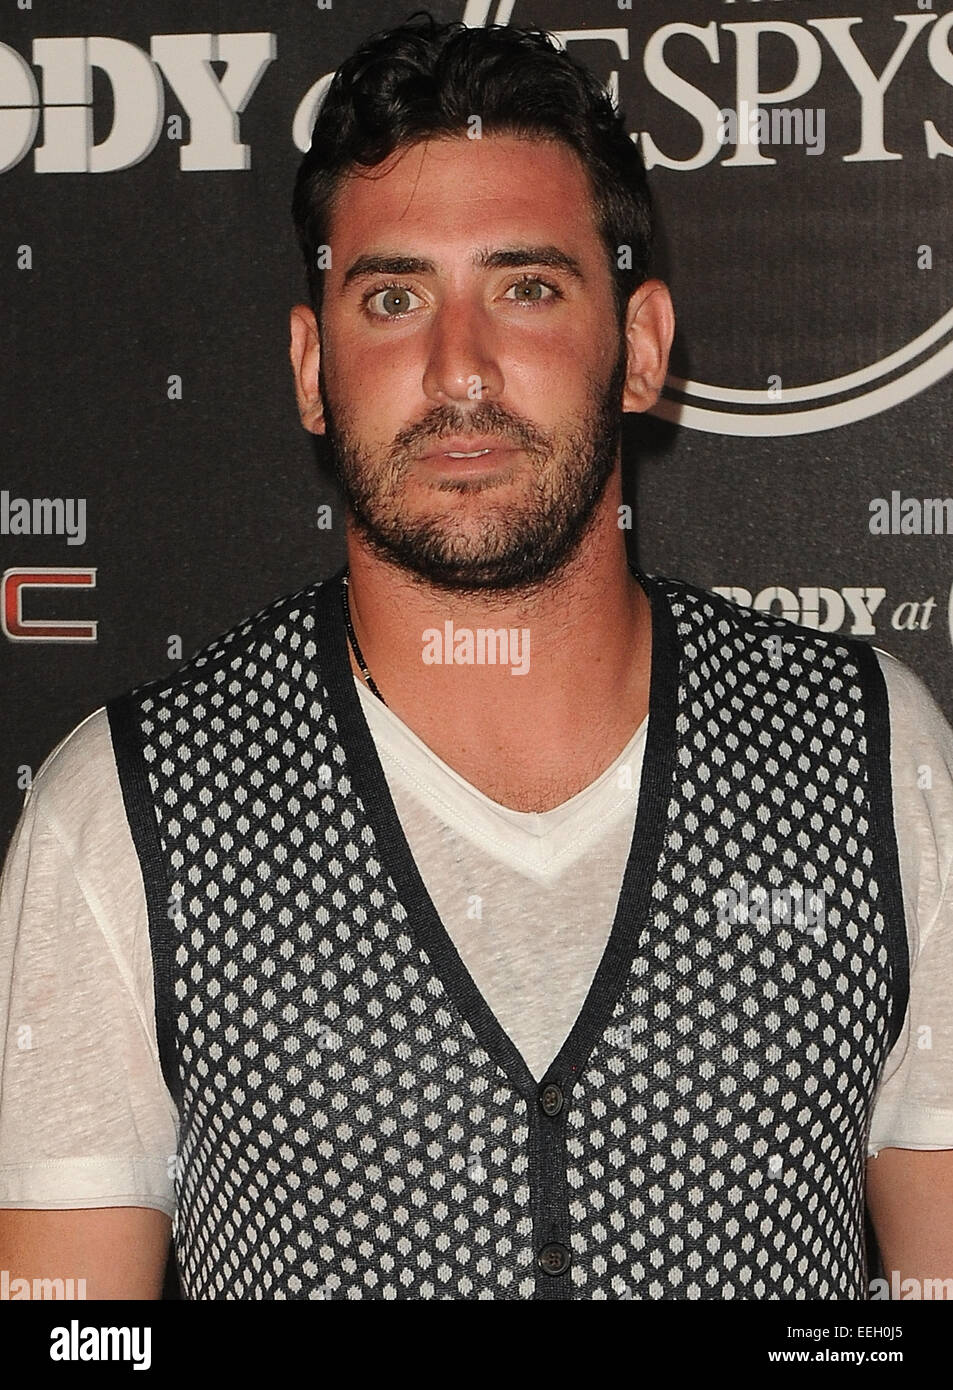 ESPN presents BODY at ESPYS pre-party - Arrivals Featuring: Matt Harvey  Where: Hollywood, California, United States When: 16 Jul 2014 Stock Photo -  Alamy